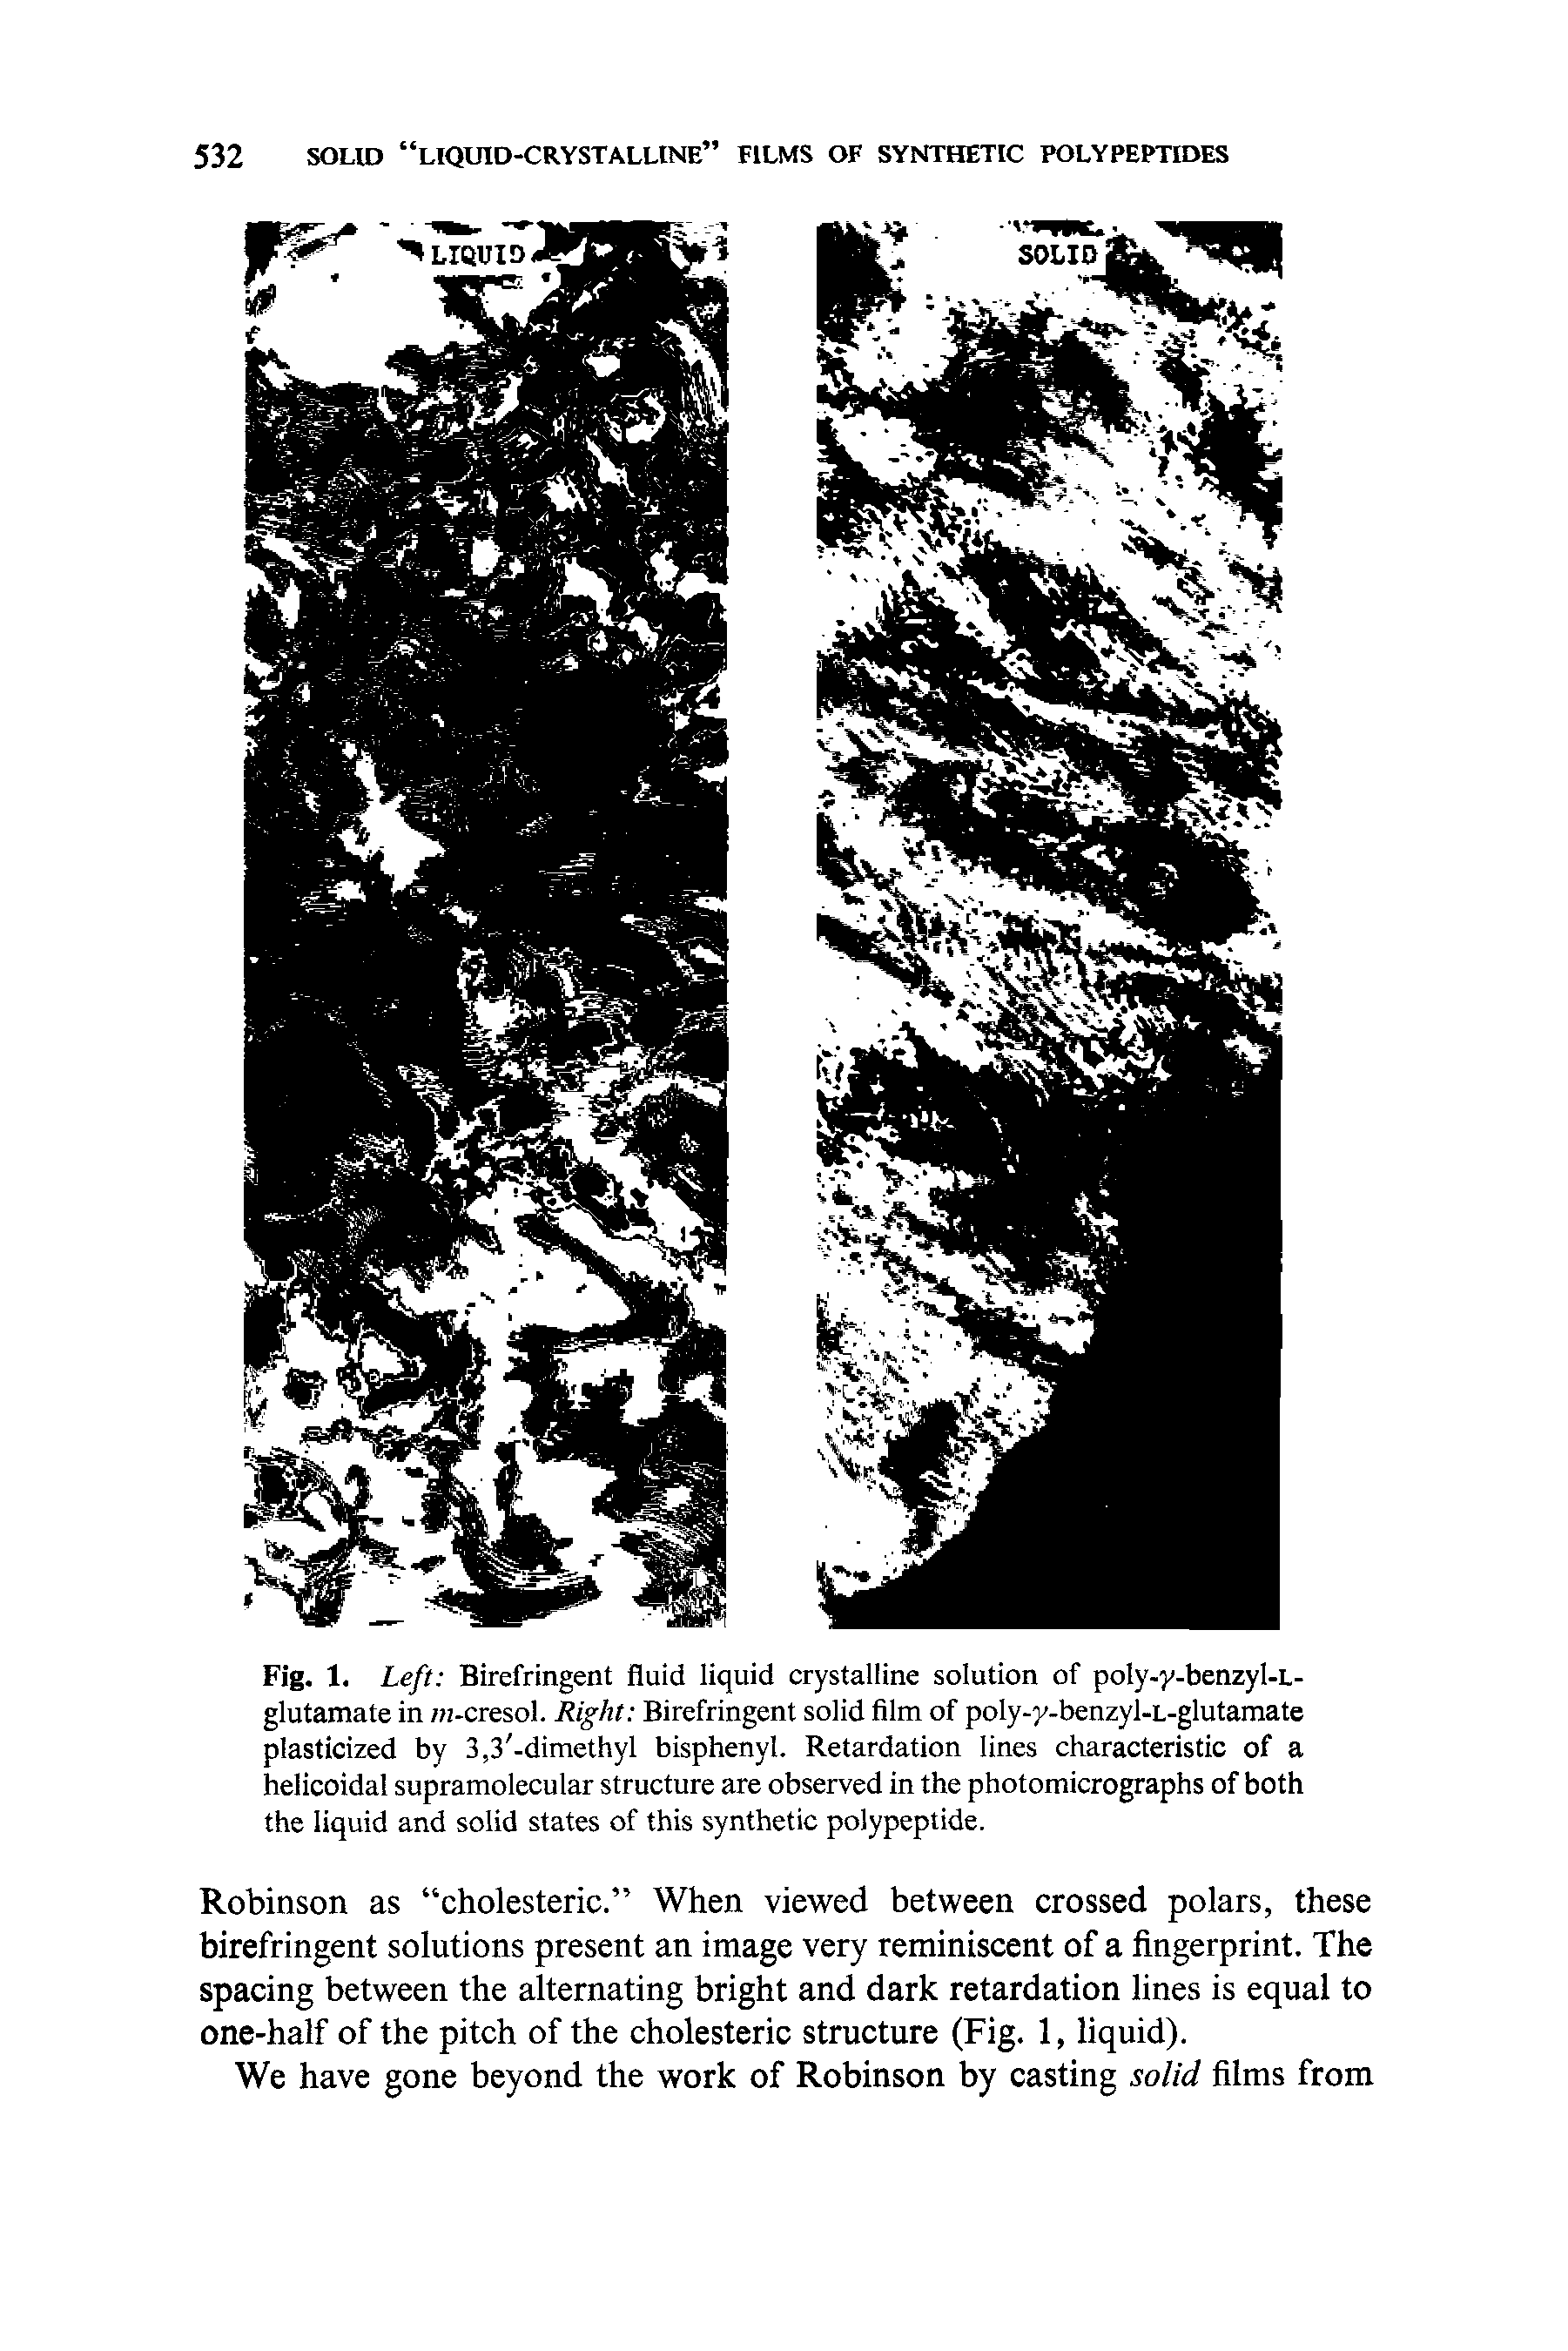 Fig. 1. Left Birefringent fluid liquid crystalline solution of poly-y-benzyl-L-glutamate in /n-cresol. Right Birefringent solid film of poly-y-benzyl-L-glutamate plasticized by 3,3 -dimethyl bisphenyl. Retardation lines characteristic of a helicoidal supramolecular structure are observed in the photomicrographs of both the liquid and solid states of this synthetic polypeptide.